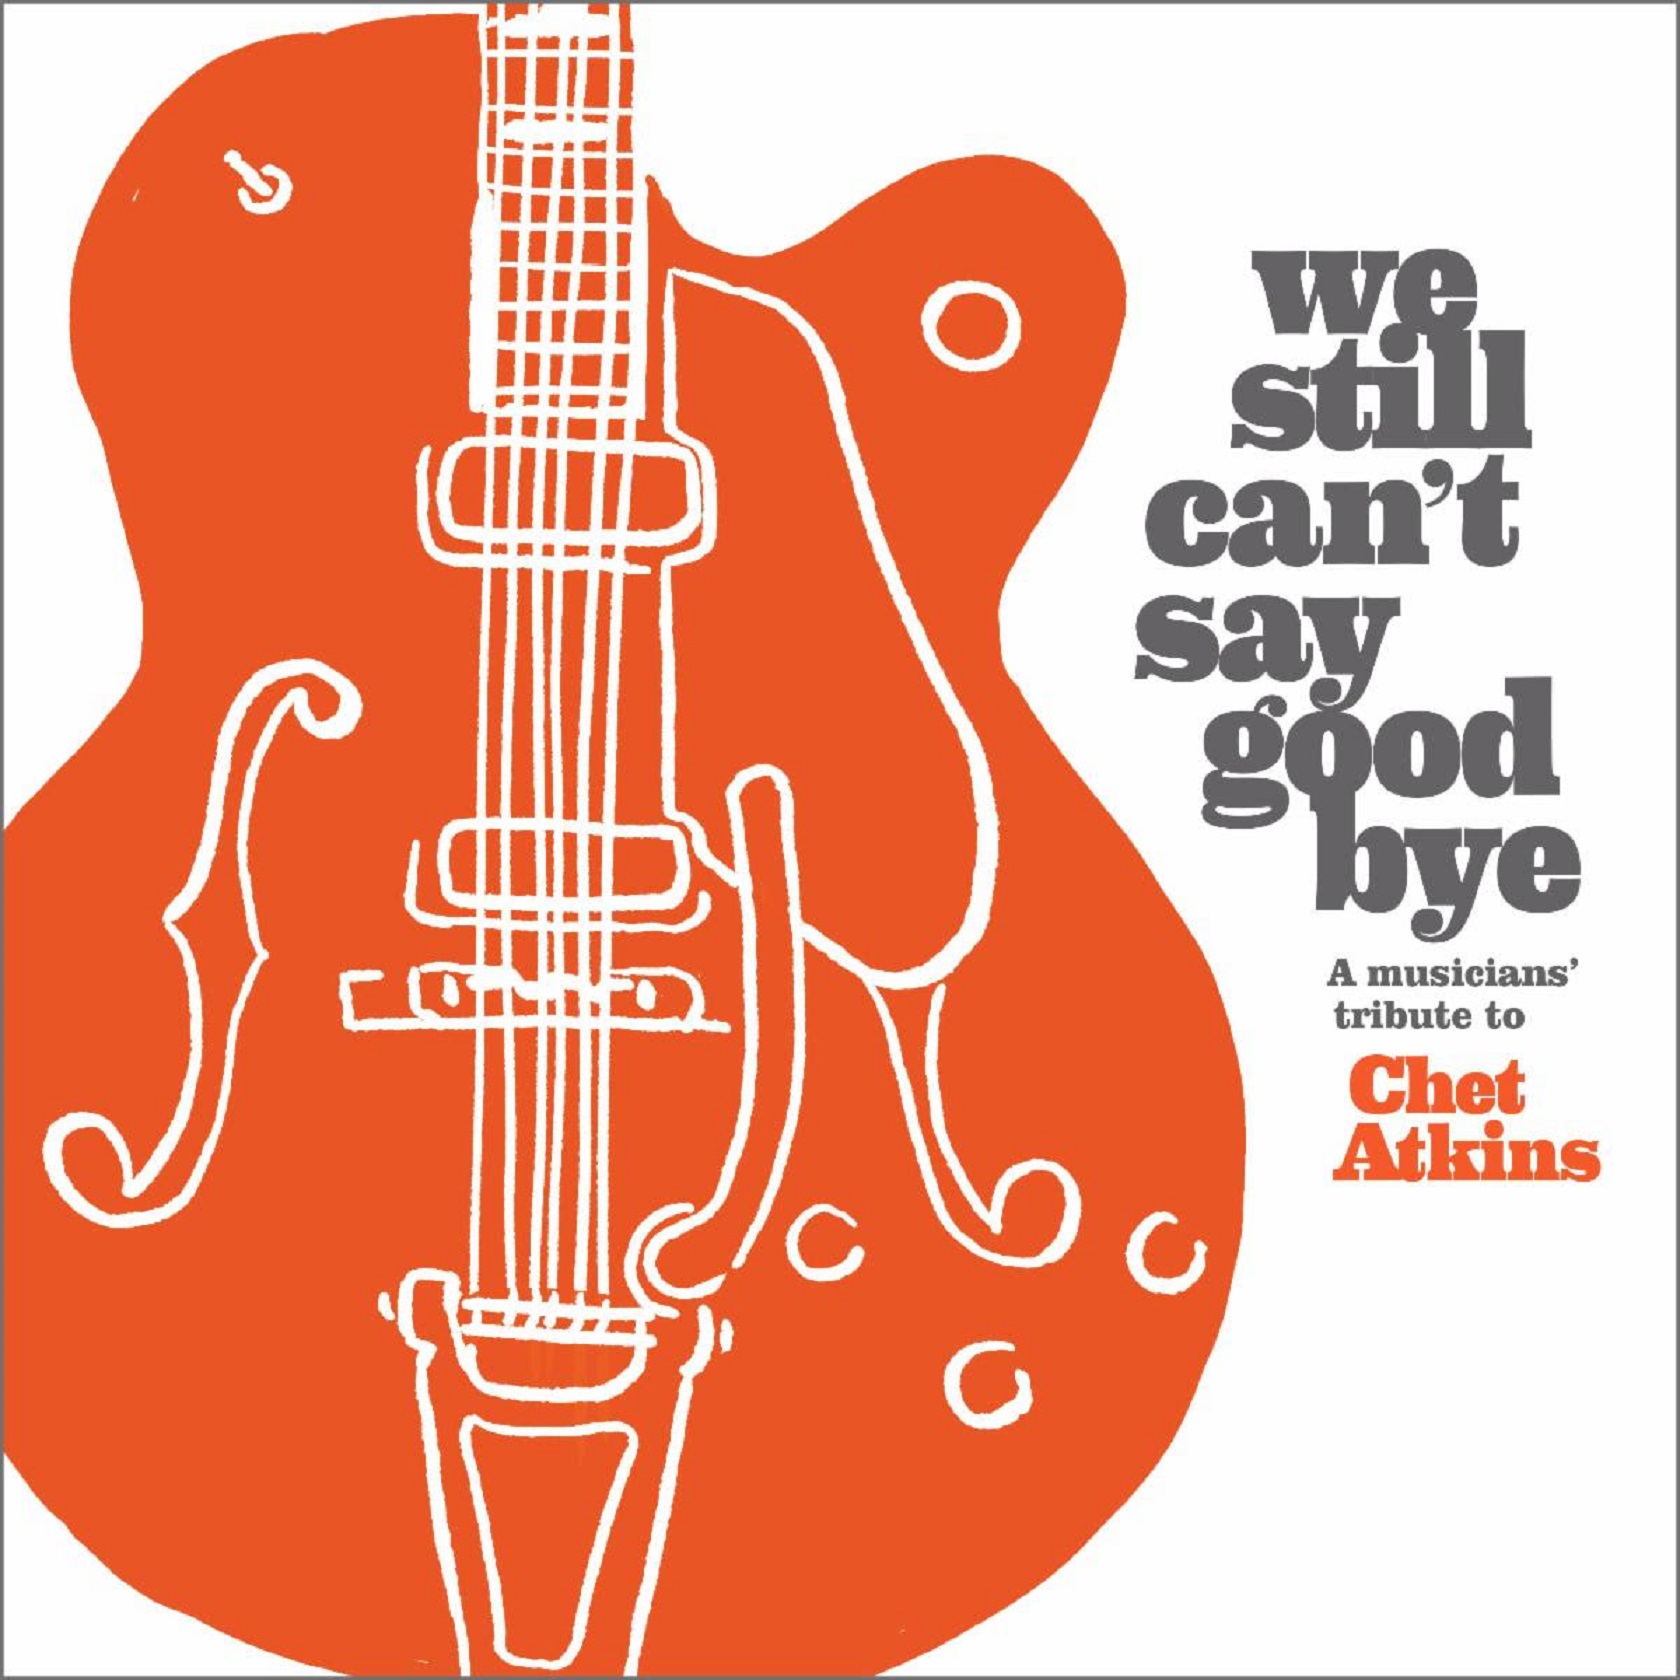 ‘WE STILL CAN’T SAY GOOD BYE’ A Musicians’ Tribute To Chet Atkins Due Out 4/19